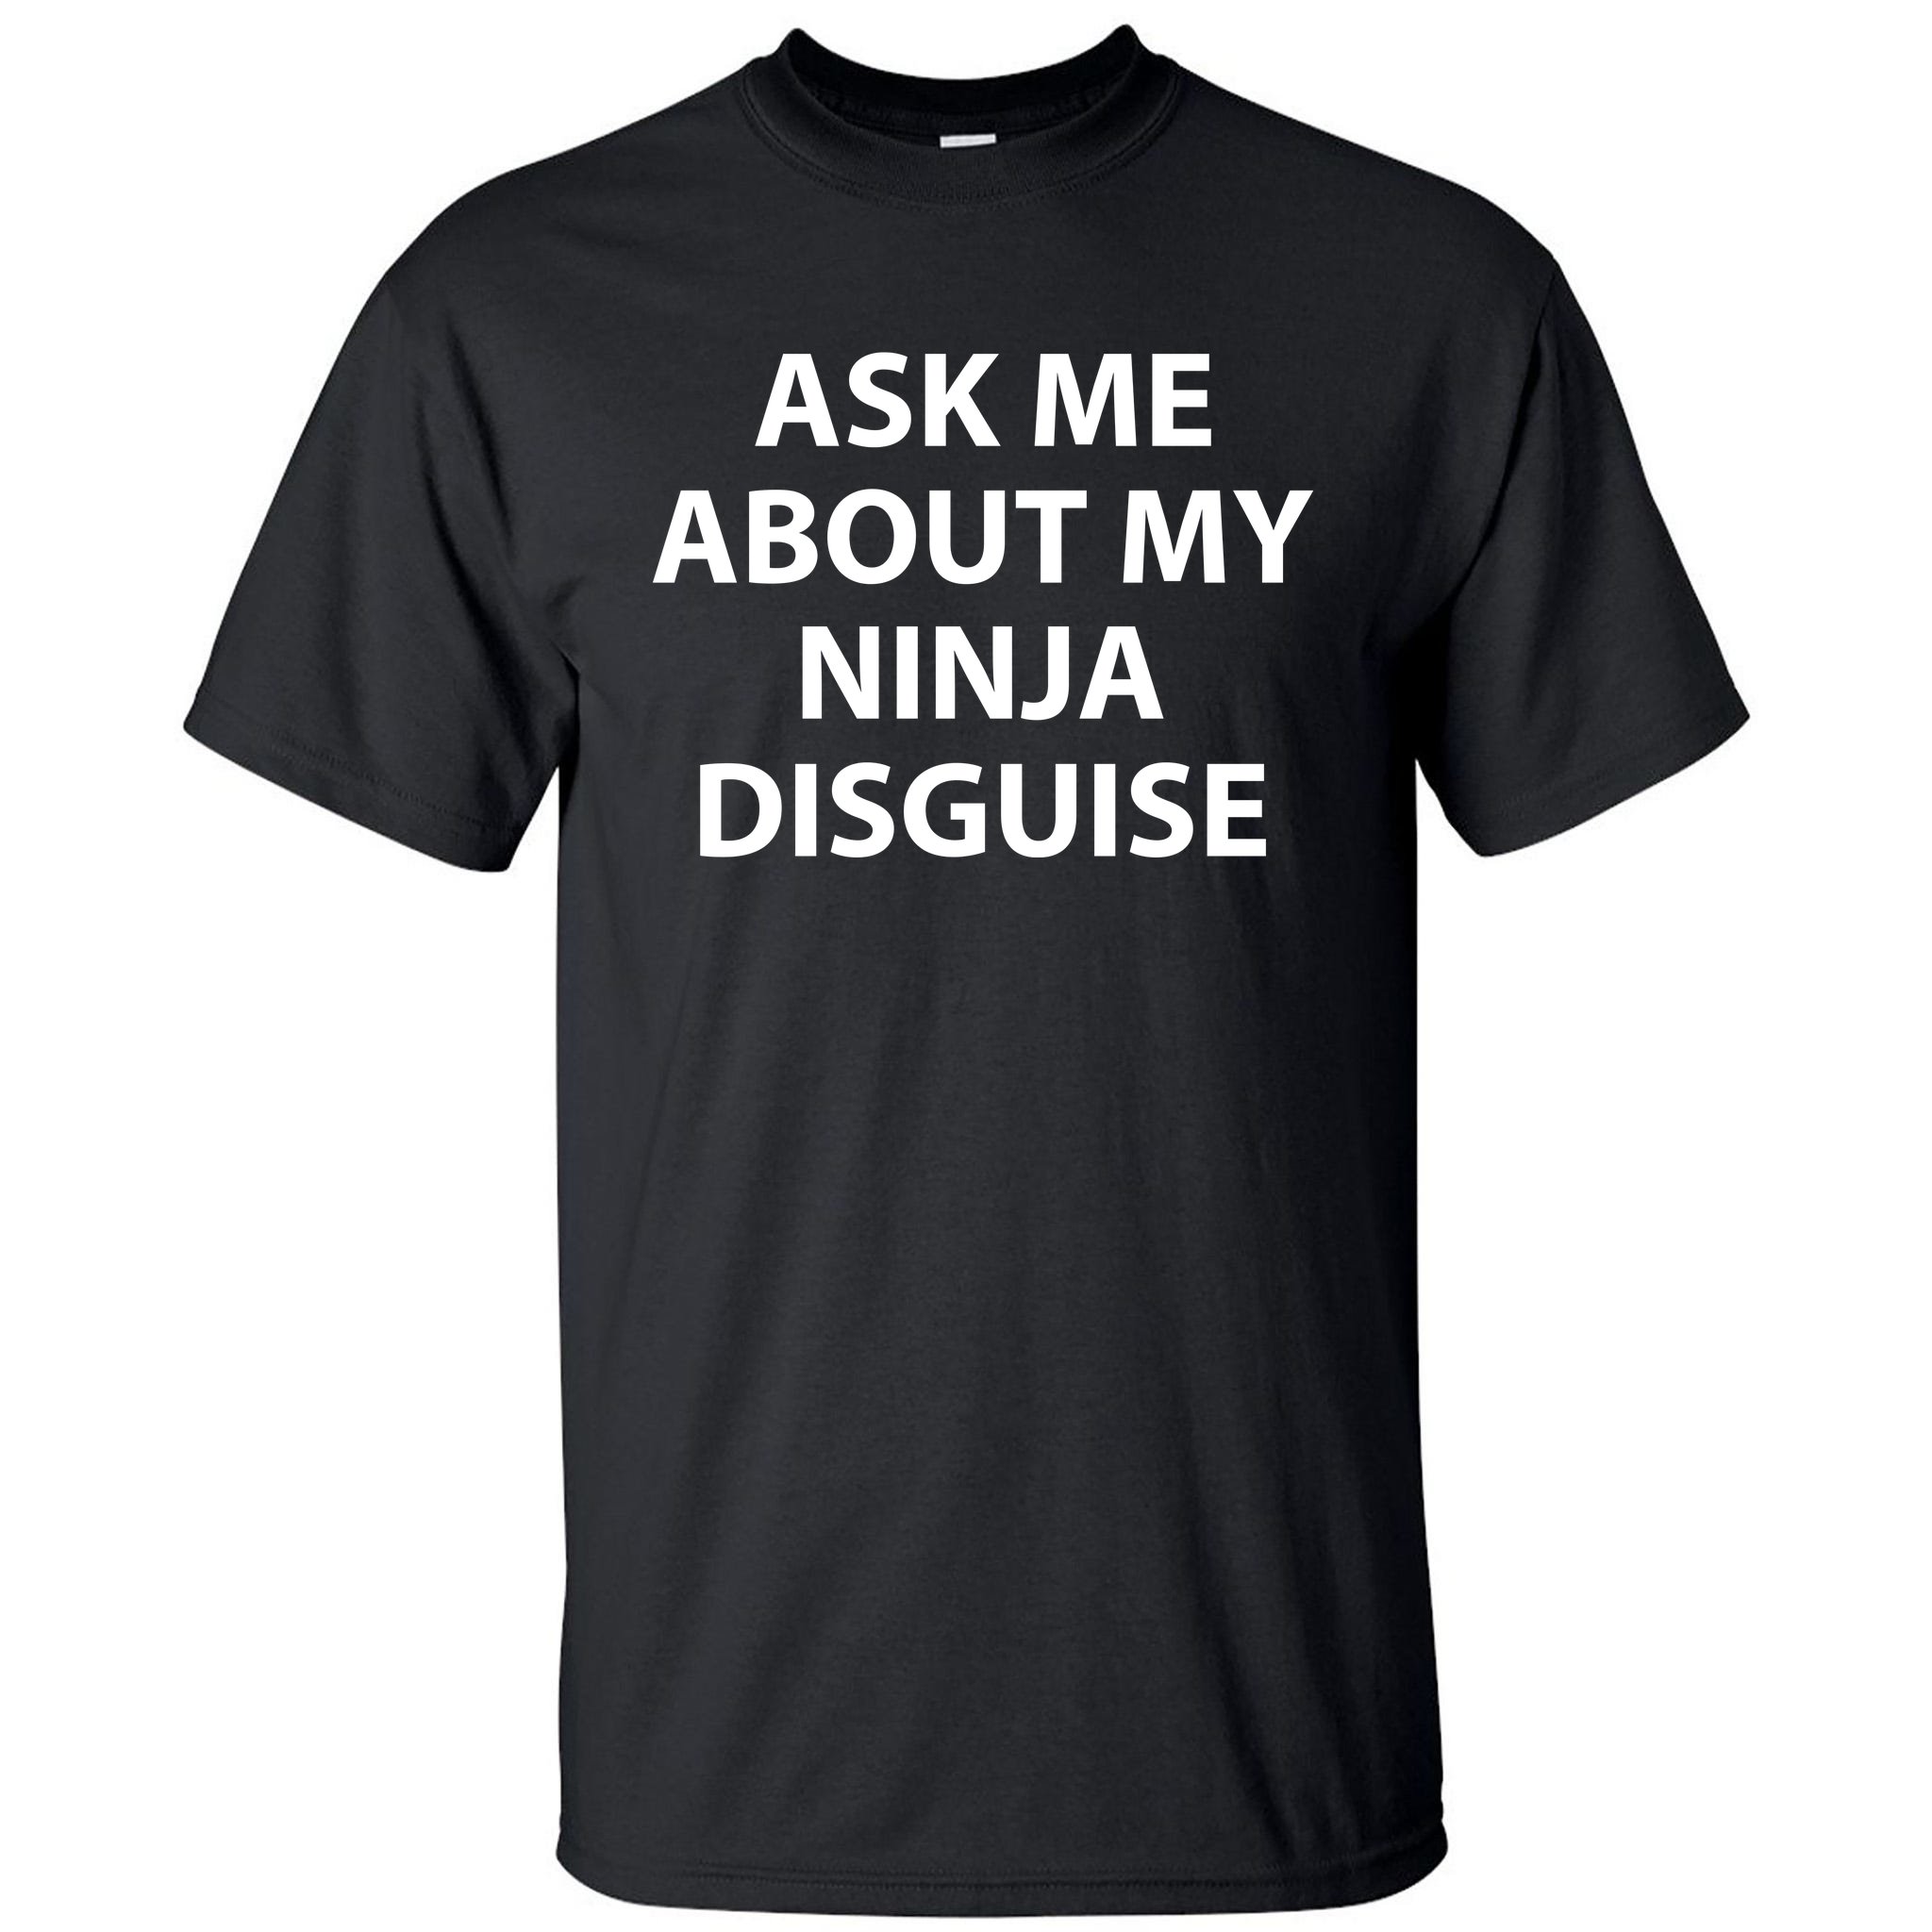 https://images3.teeshirtpalace.com/images/productImages/ama5735564-ask-me-about-my-ninja-disguise-funny--black-att-garment.jpg